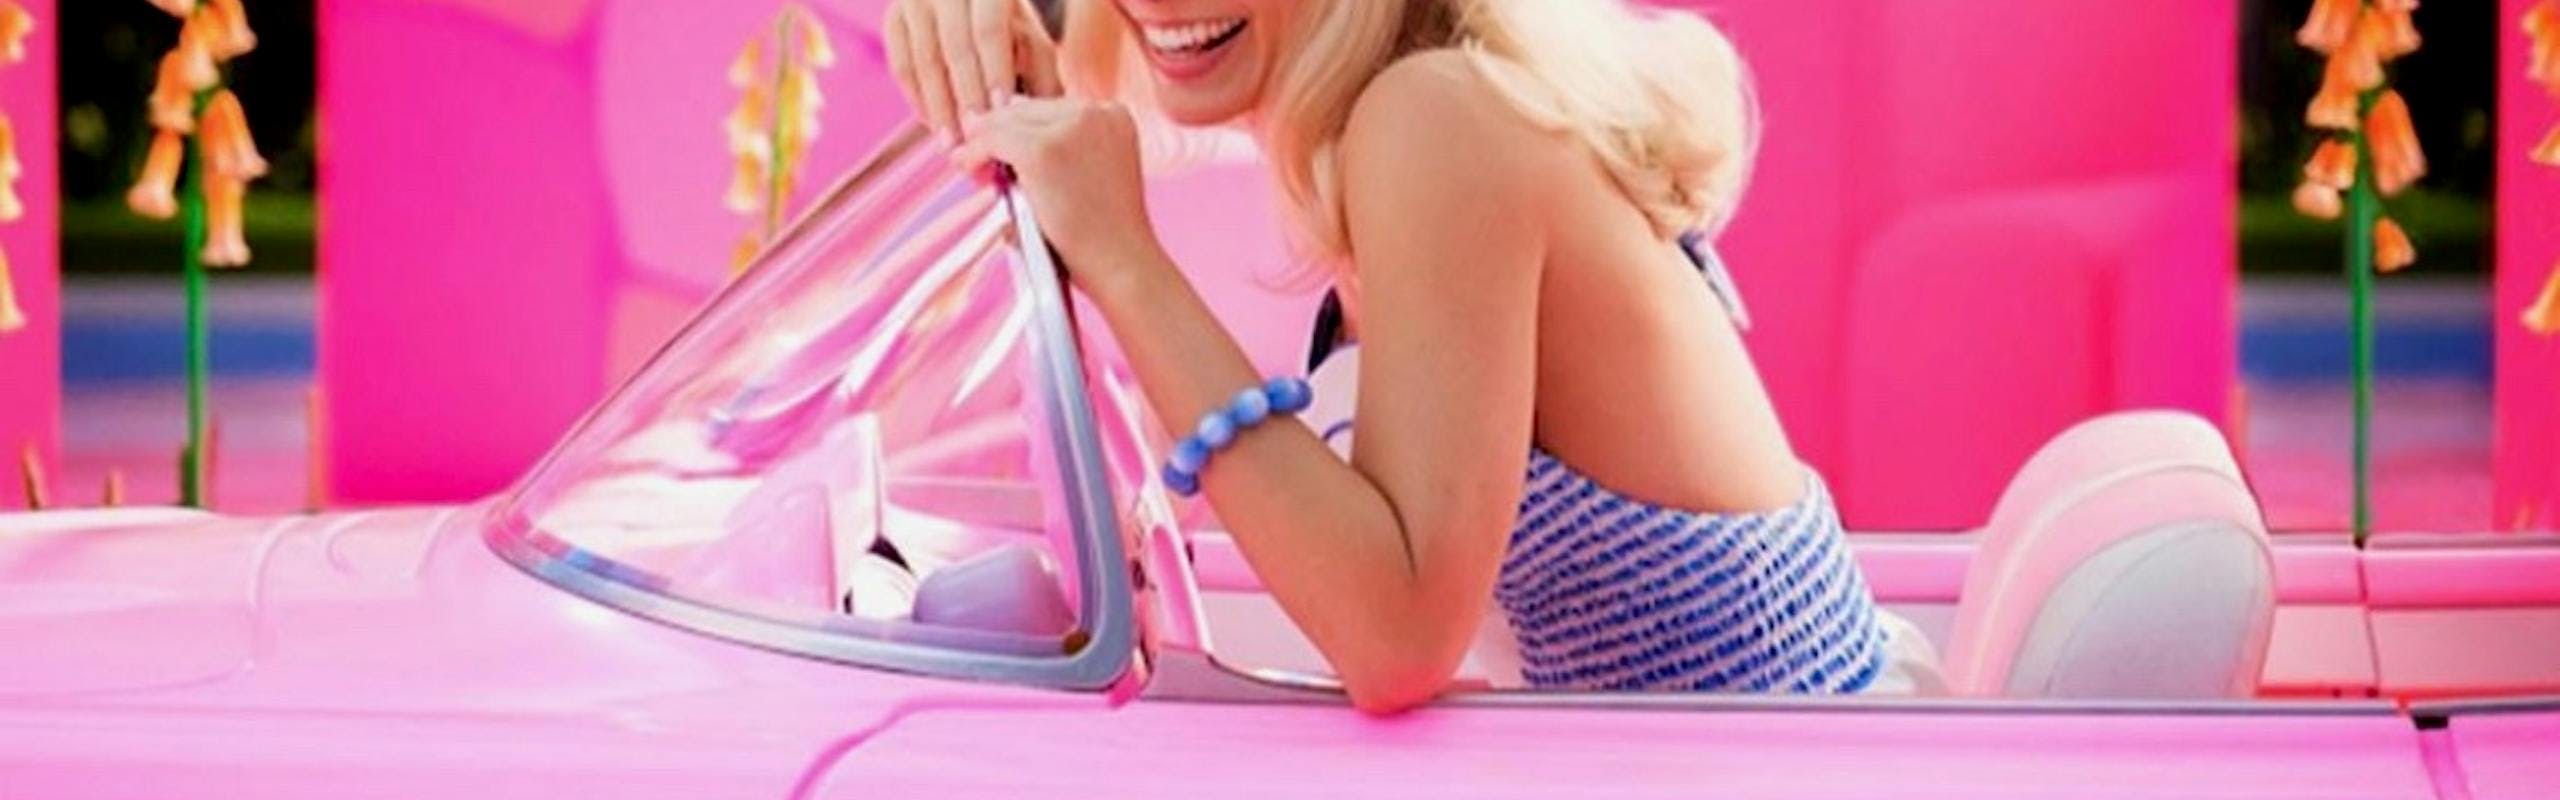 Margot Robbie in a pink convertible for the Barbie Movie